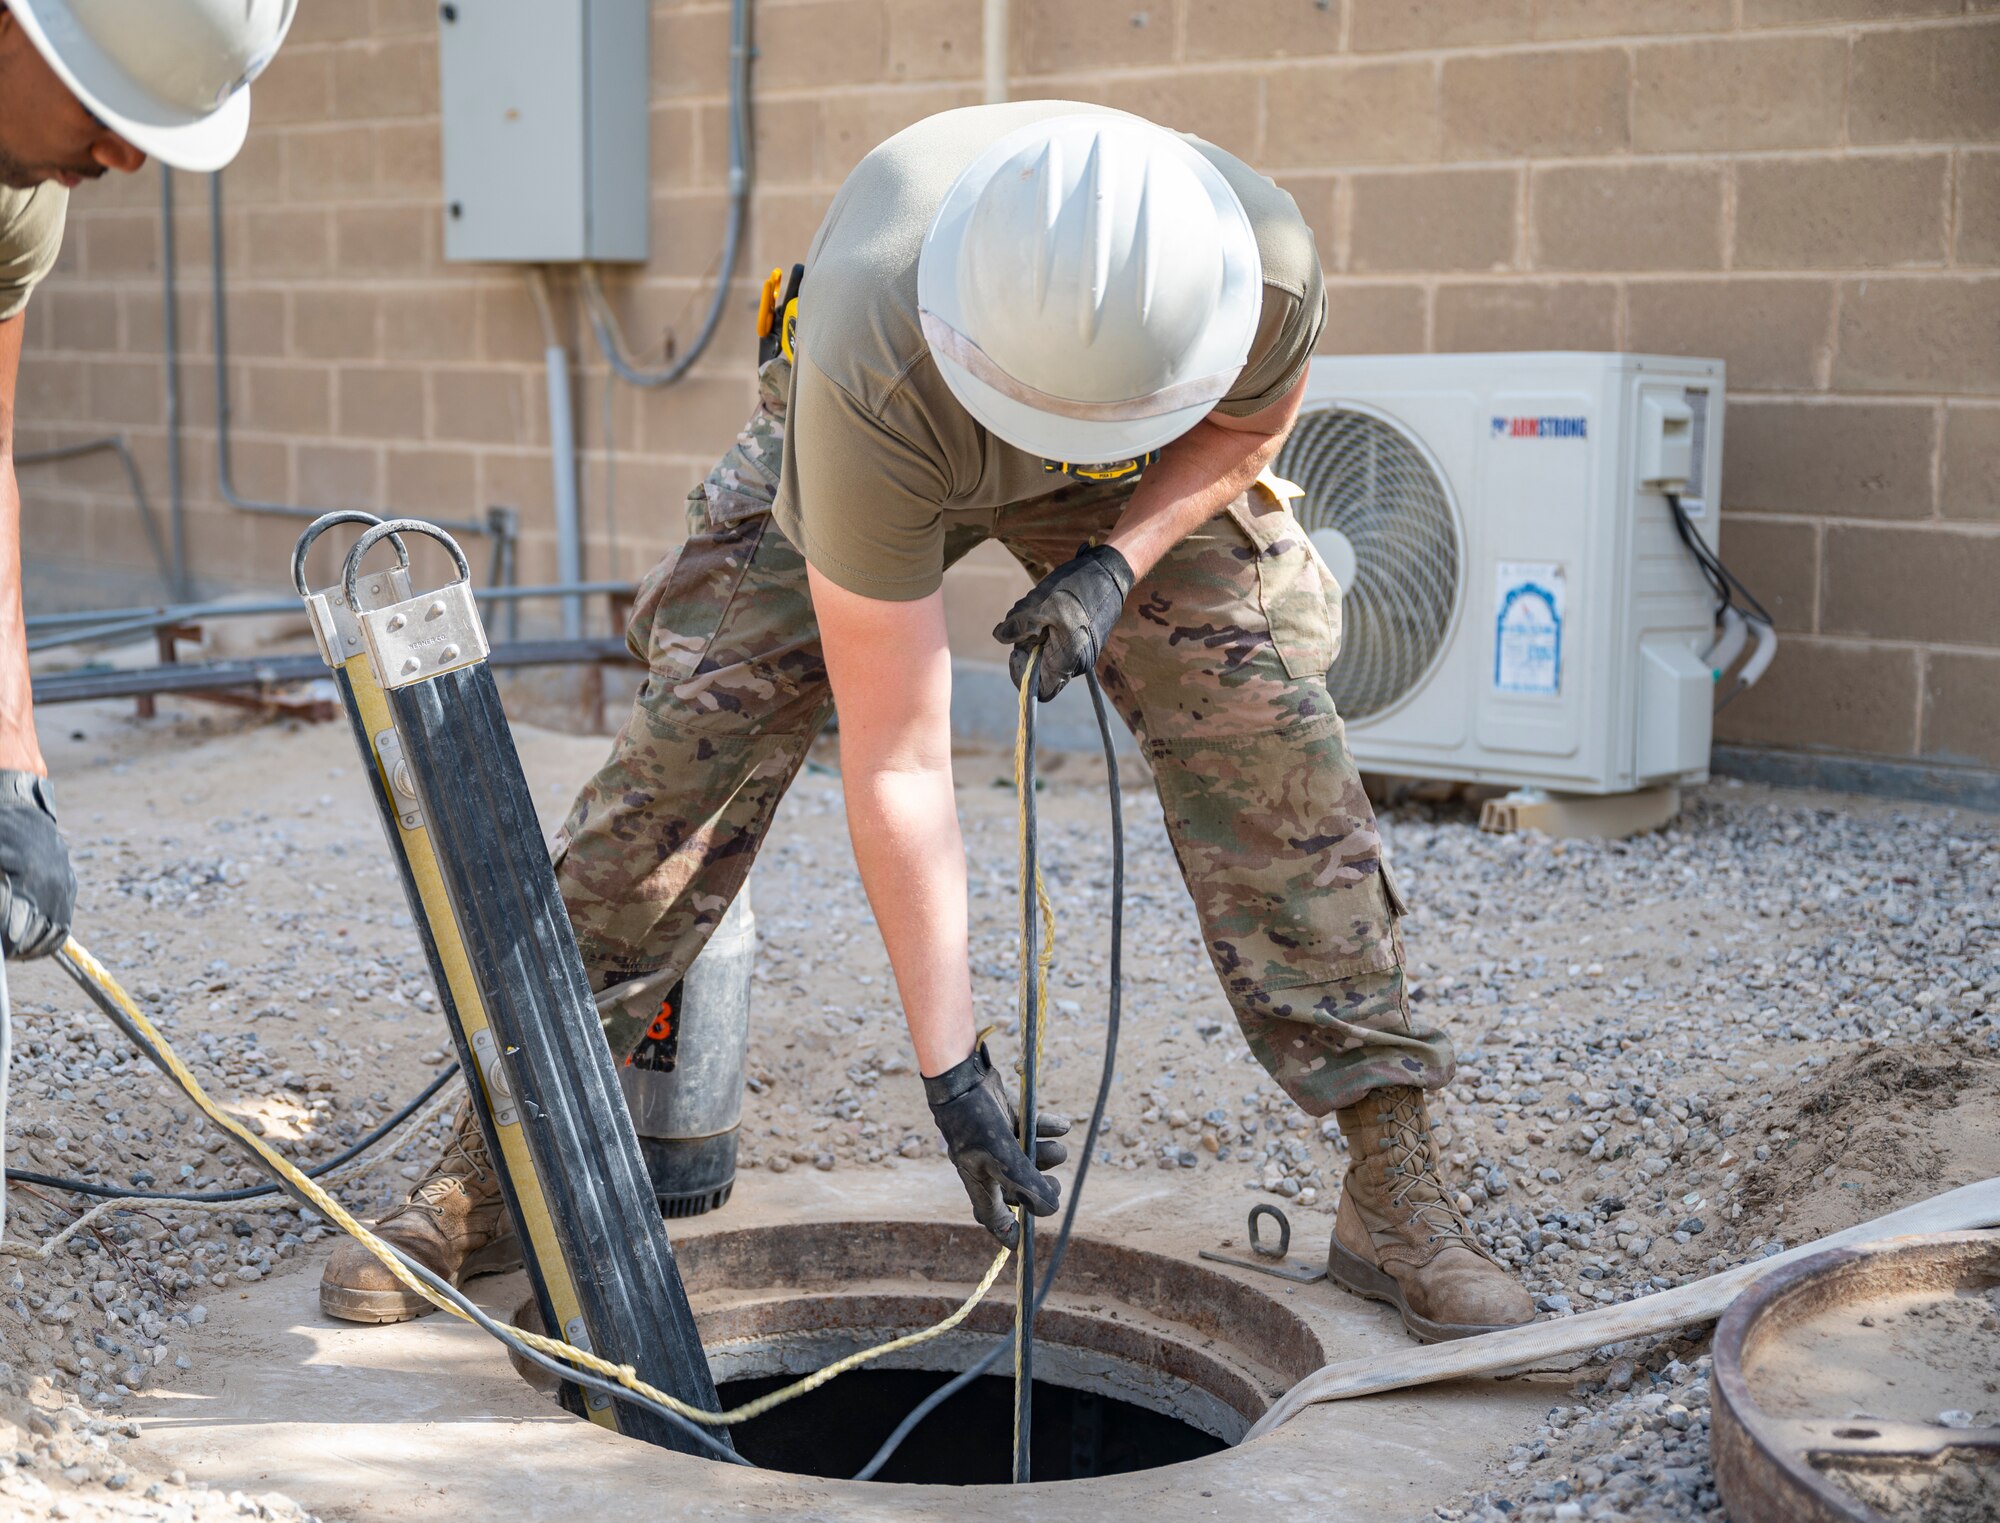 A member of the U.S. Air Forces Central, Air Force Forces A67 Engineering and Installation team lowers equipment into a communications maintenance hole at Ali Al Salem Air Base, Kuwait, Oct. 19, 2021.